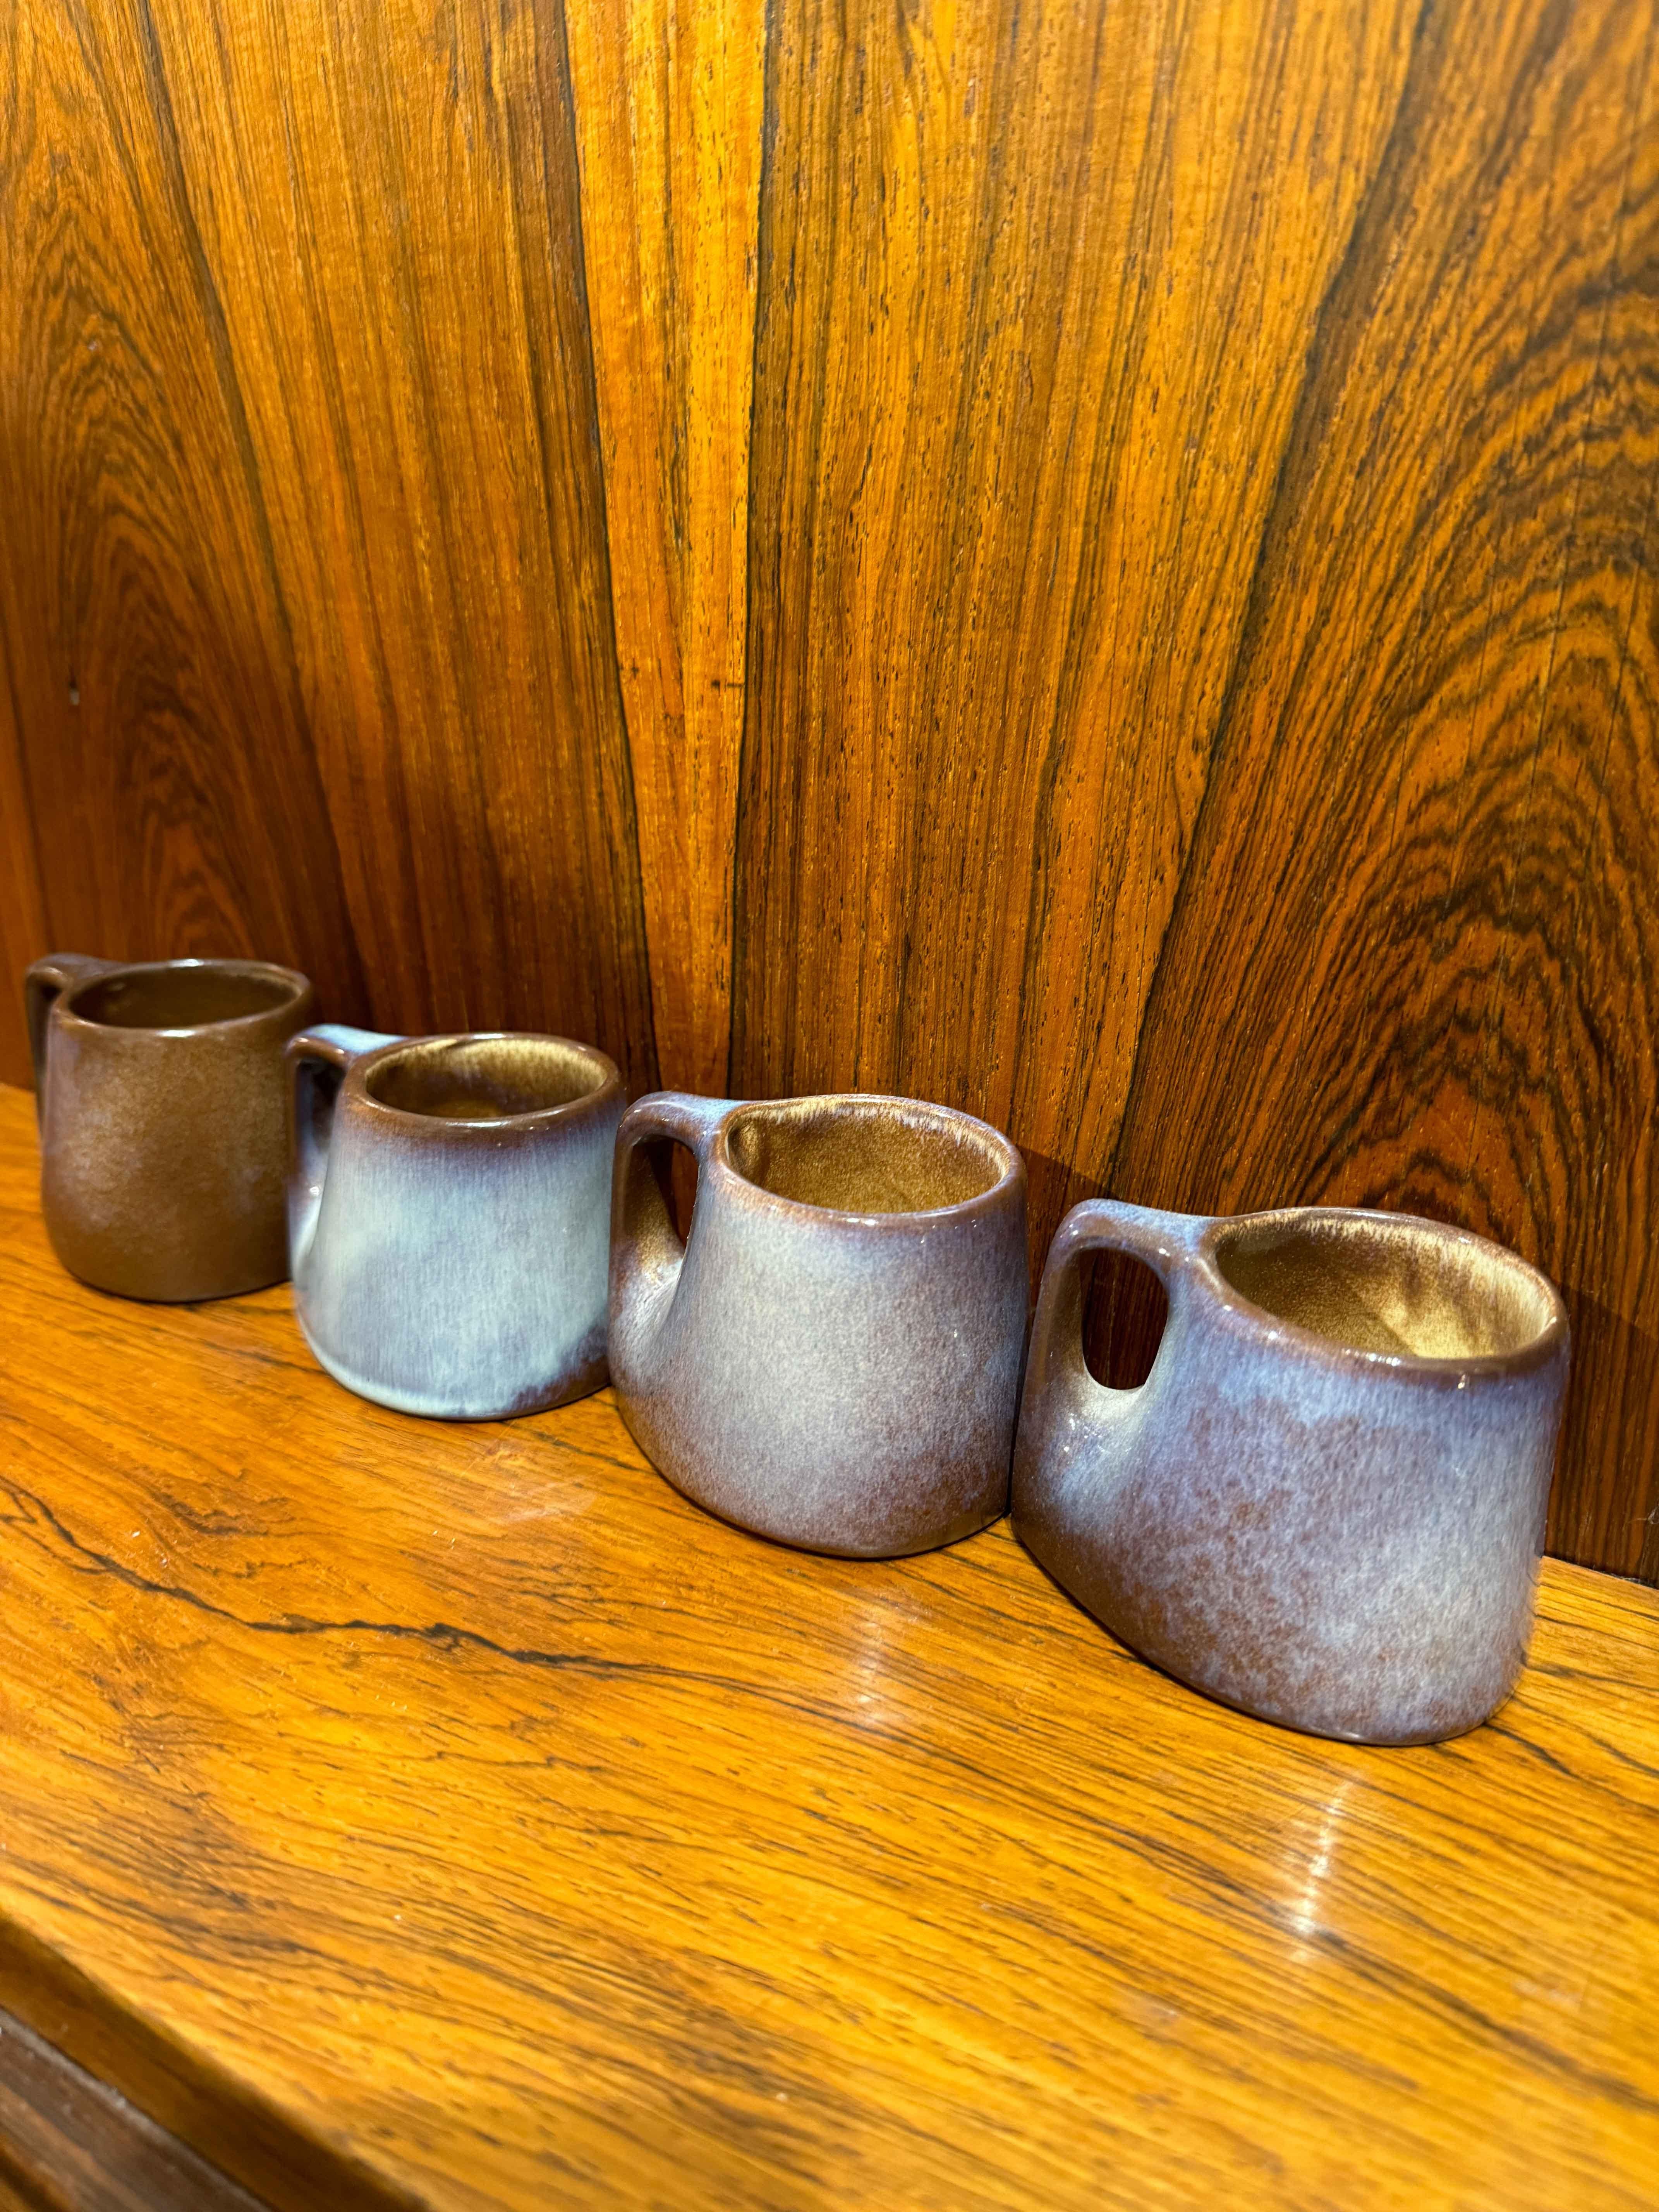 Purchasing this Mid-Century glazed ceramic tea set signed by Stocker is akin to acquiring a piece of functional art that seamlessly combines beauty with practicality. Crafted during the Mid-Century period, this tea set exemplifies the era's